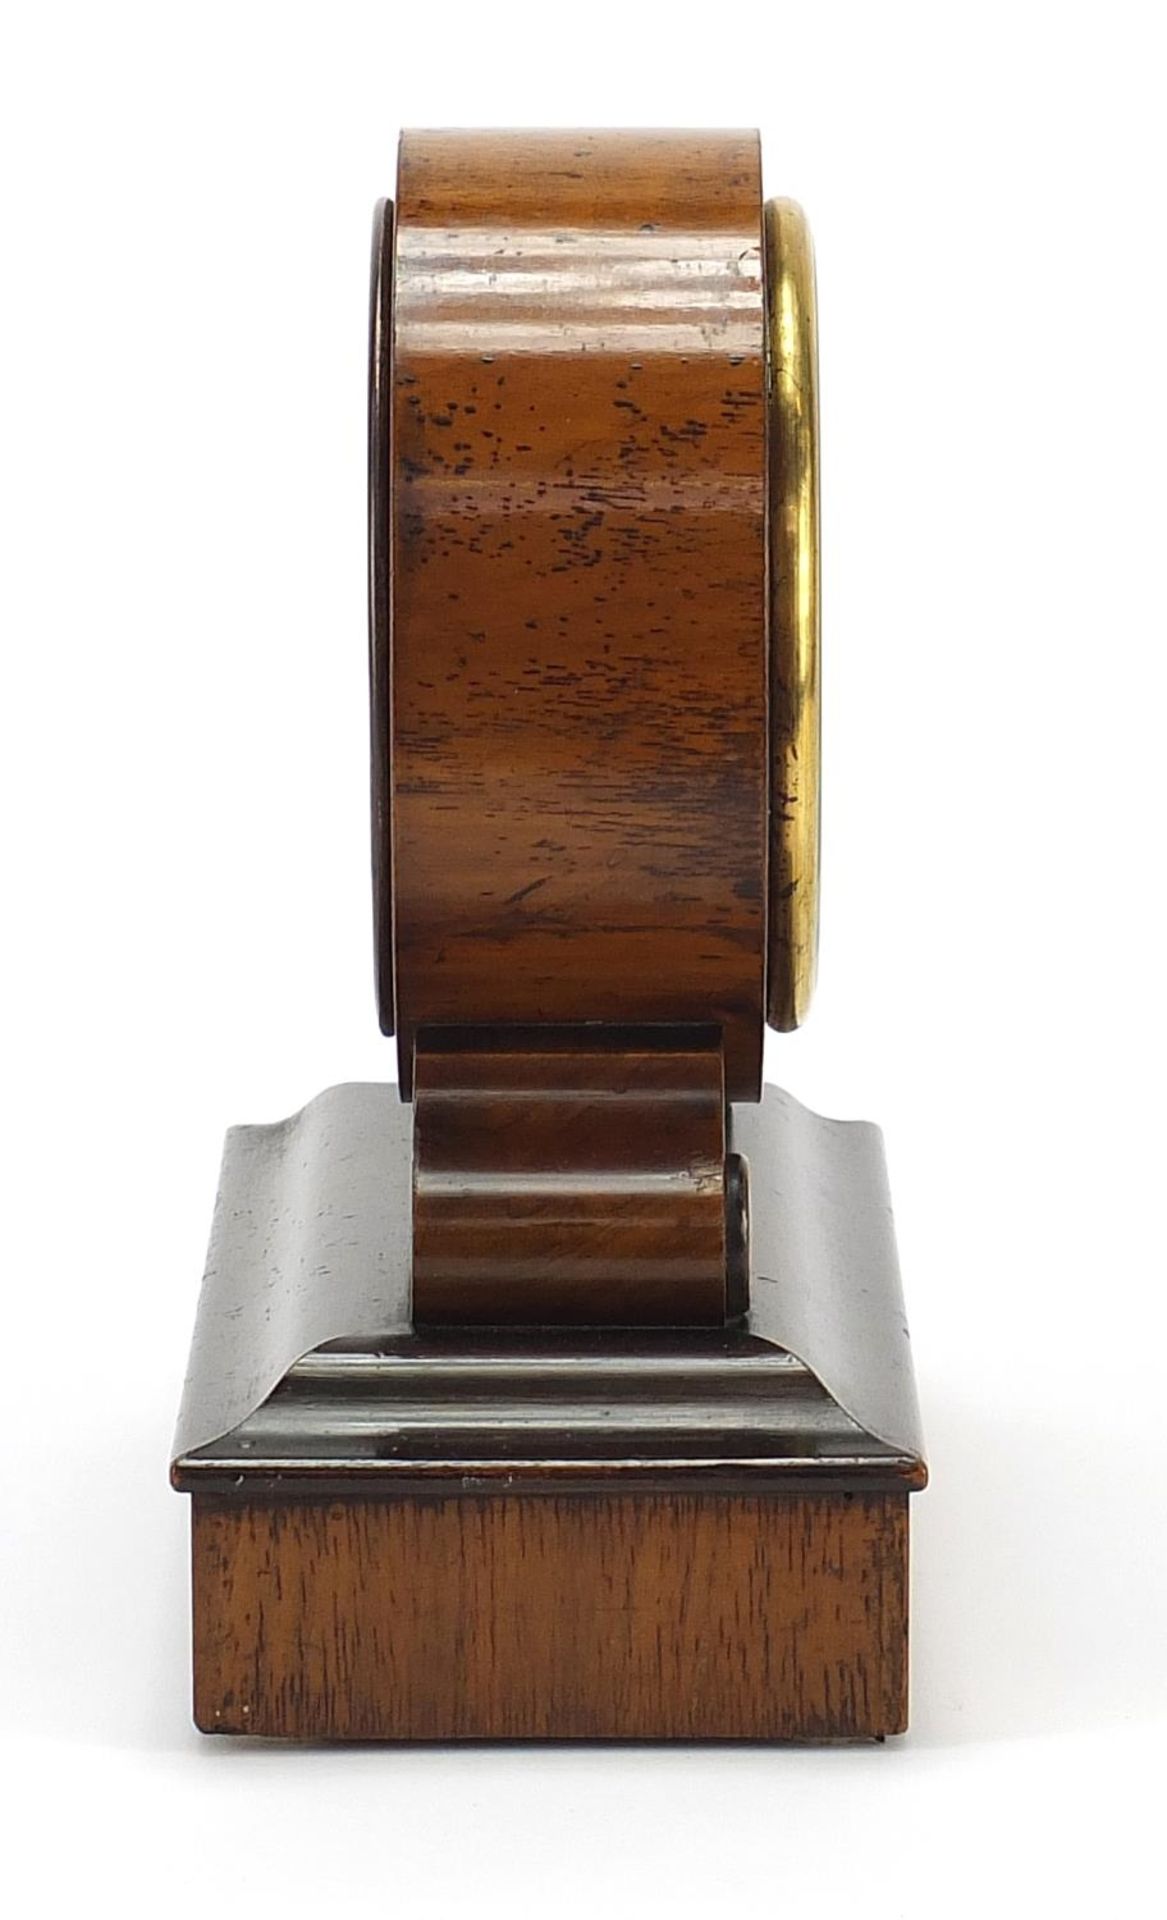 19th century walnut mantle clock with Roman numerals, the movement impressed V.A.P Brevete, 22.5cm - Image 7 of 7